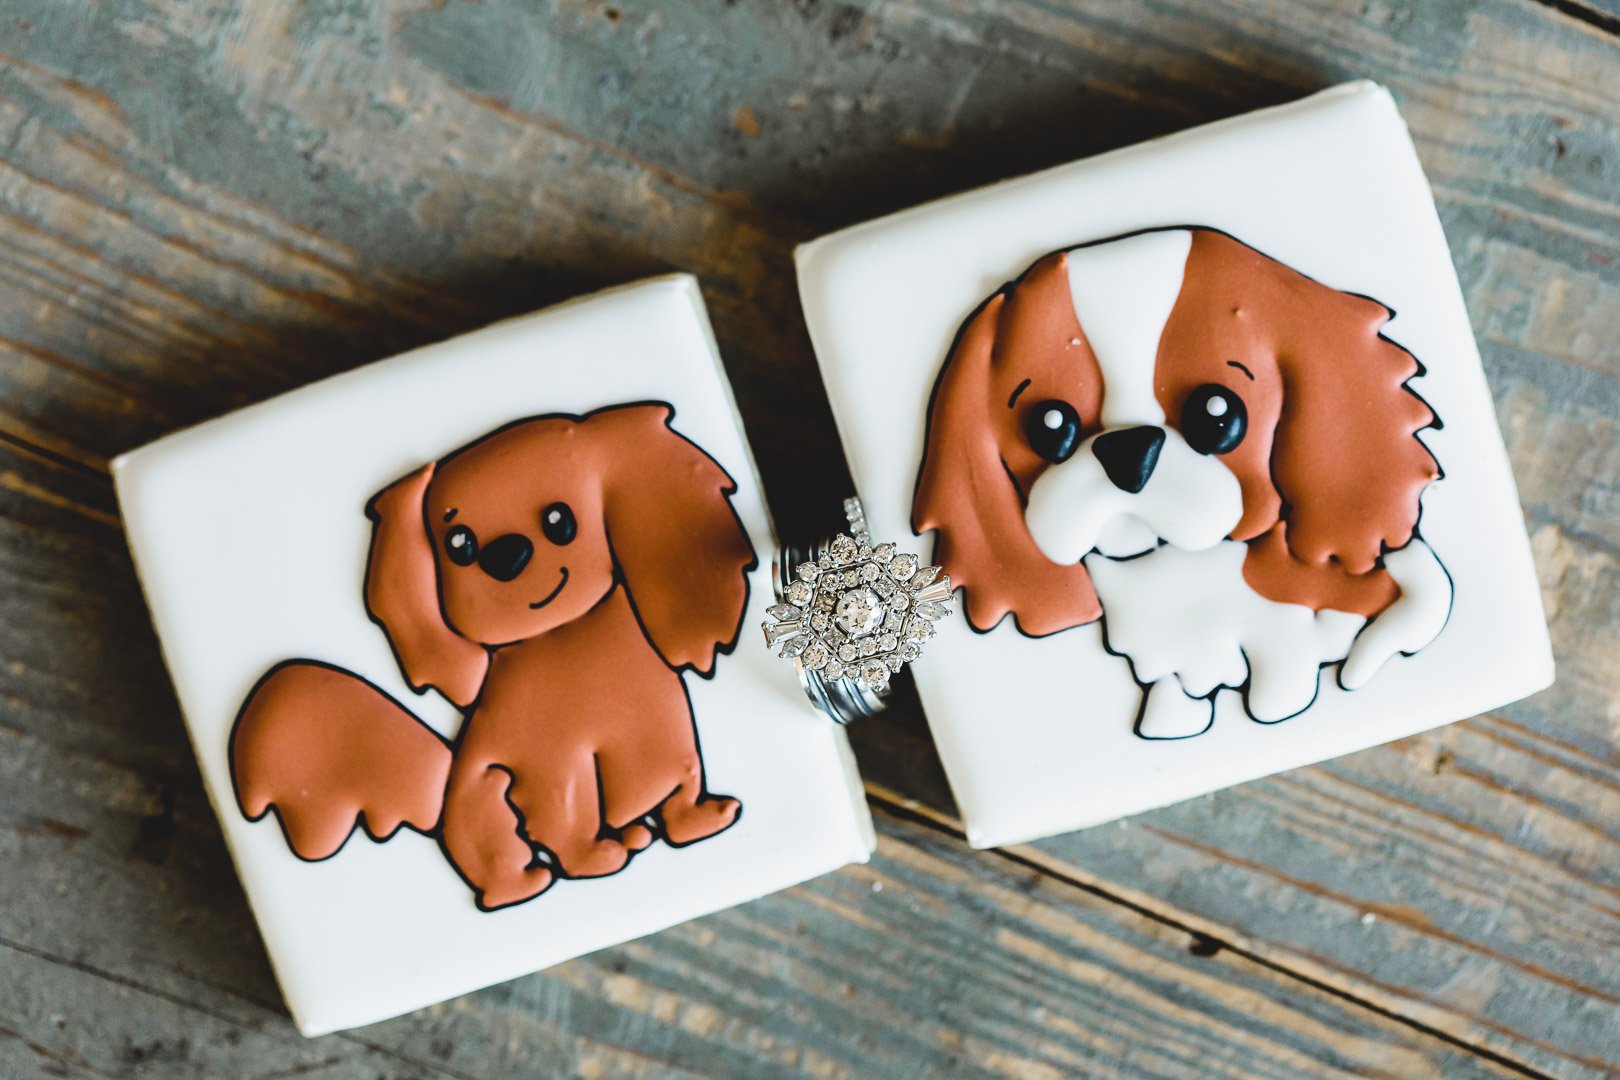 dogs-at-wedding-and-decor-invites-cookies (2).jpg